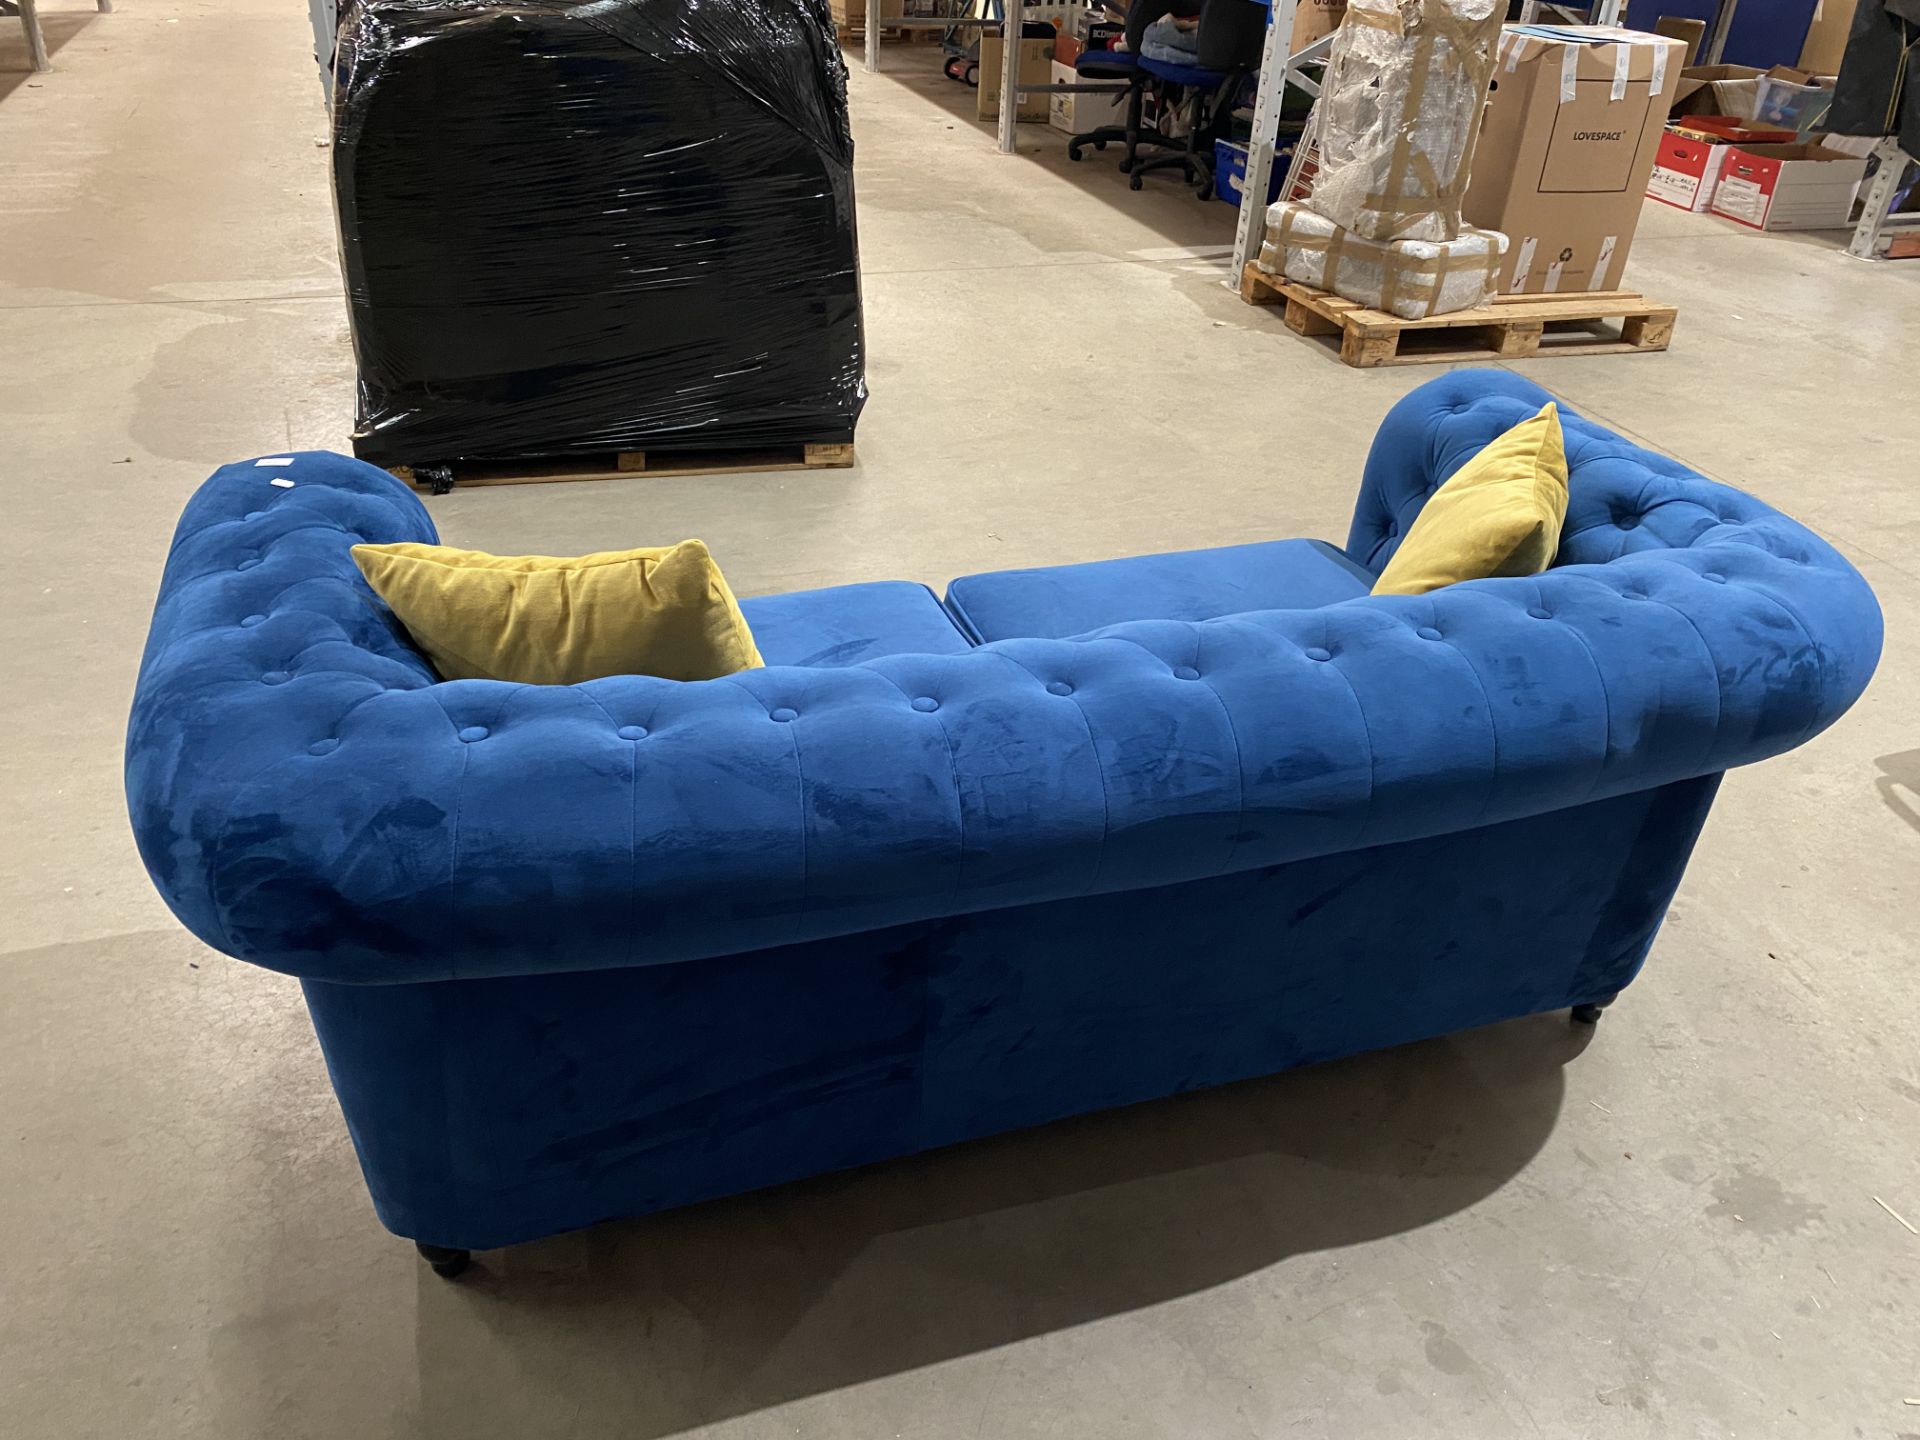 Blue upholstered button-backed Chesterfield style 2-seater sofa complete with cushions (saleroom - Image 11 of 11